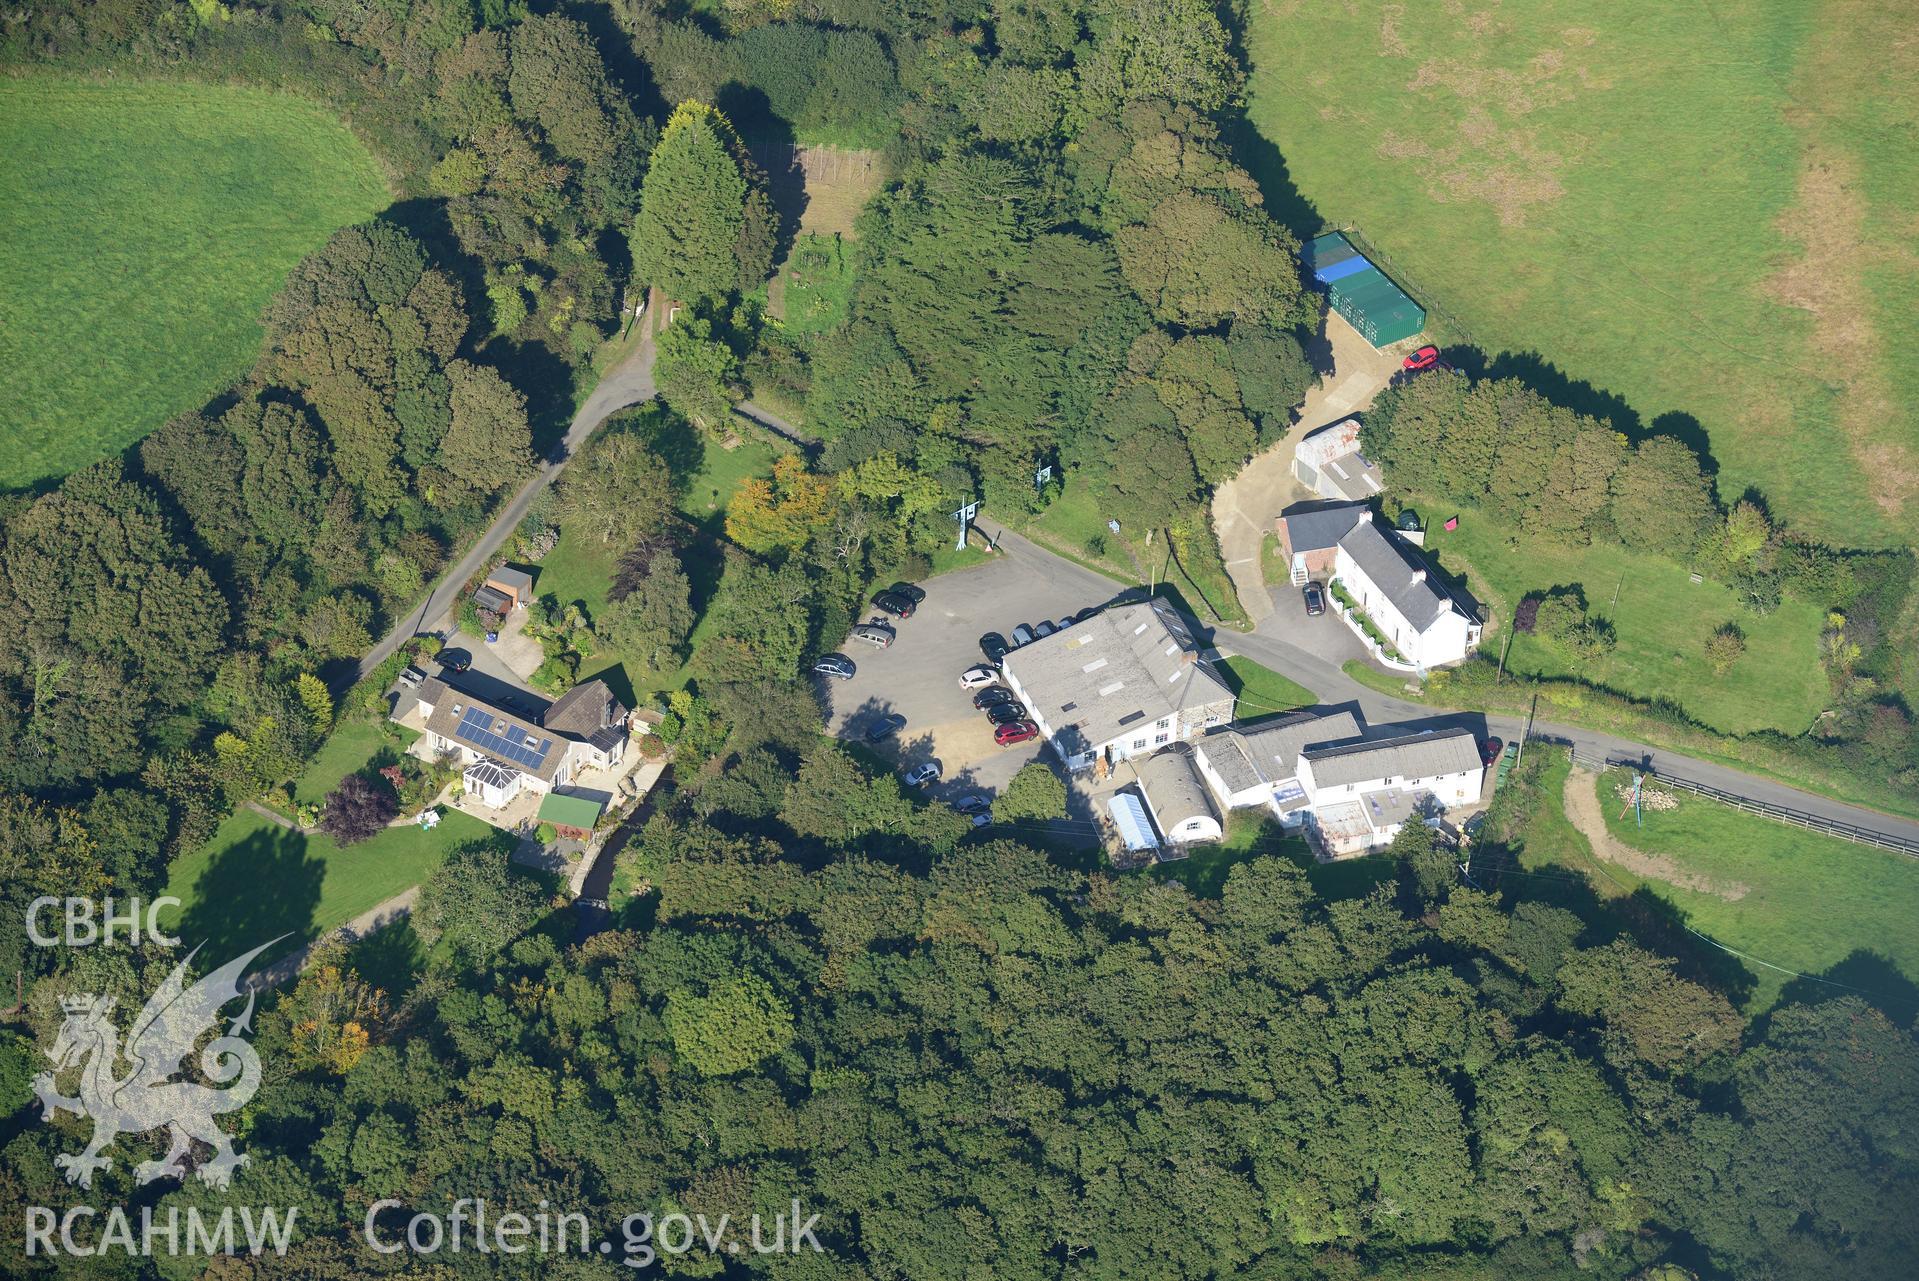 Melin Tregwynt woollen mill near Tremarchog, south west of Fishguard. Oblique aerial photograph taken during the Royal Commission?s programme of archaeological aerial reconnaissance by Toby Driver on 30th September 2015.